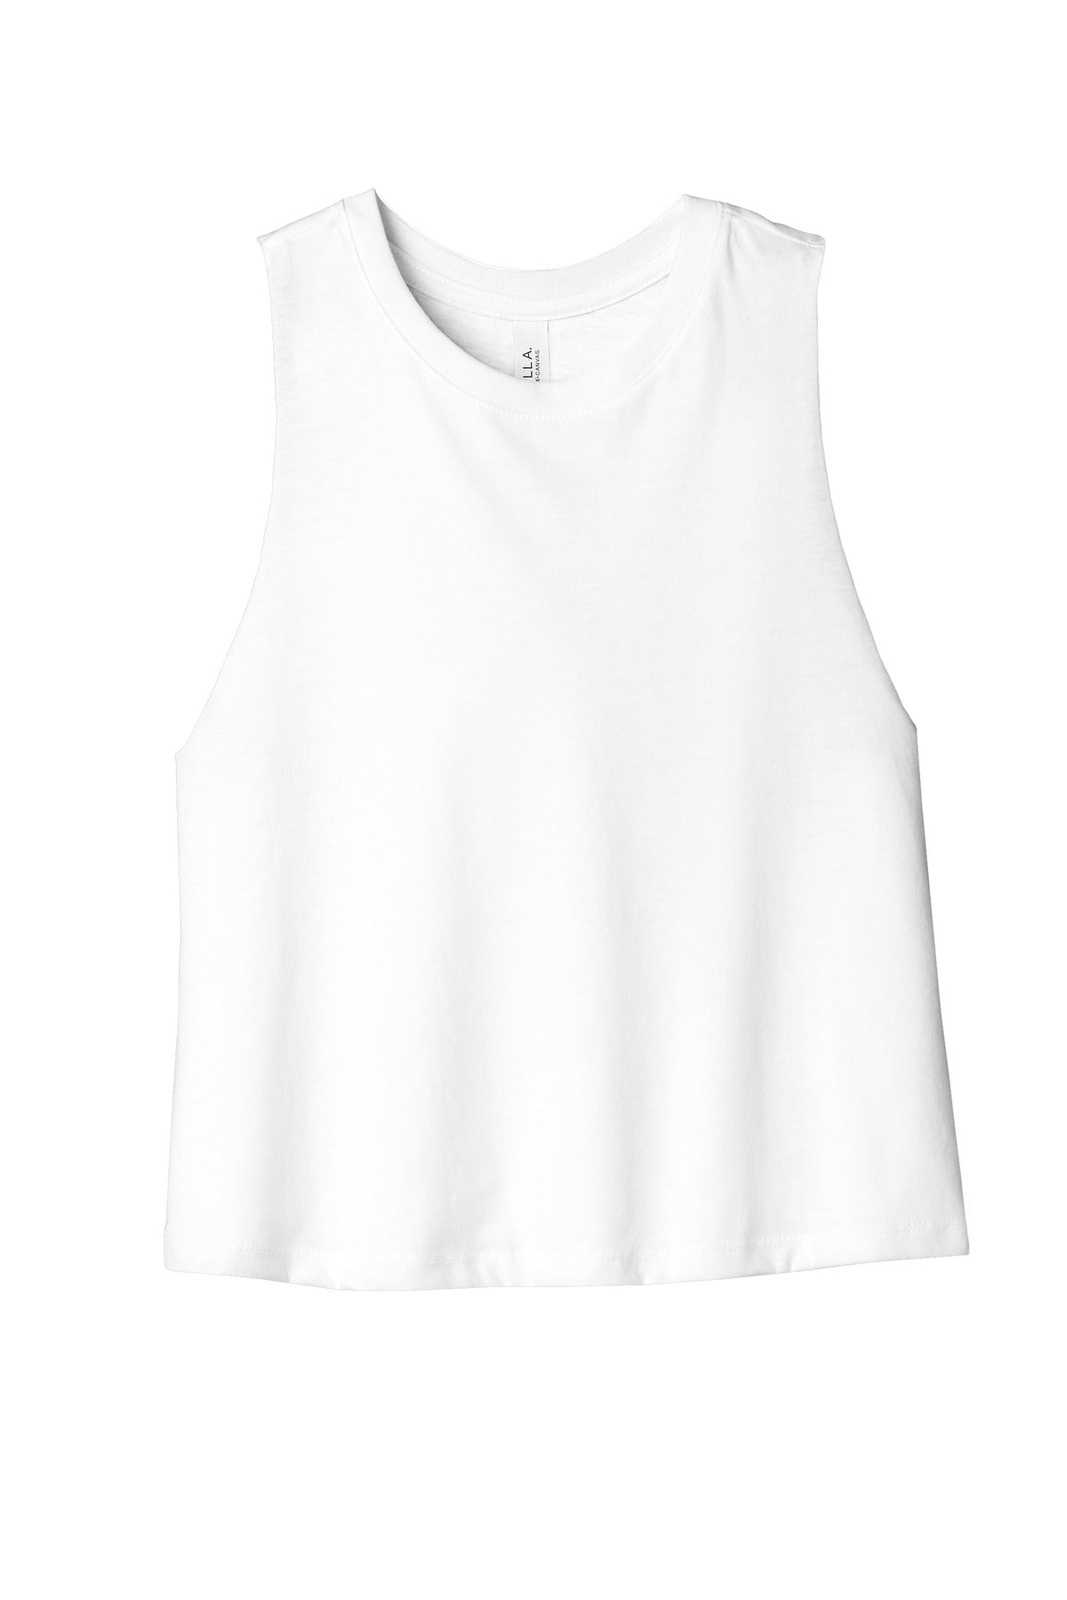 Bella + Canvas 6682 Women's Racerback Cropped Tank - Solid White Blend - HIT a Double